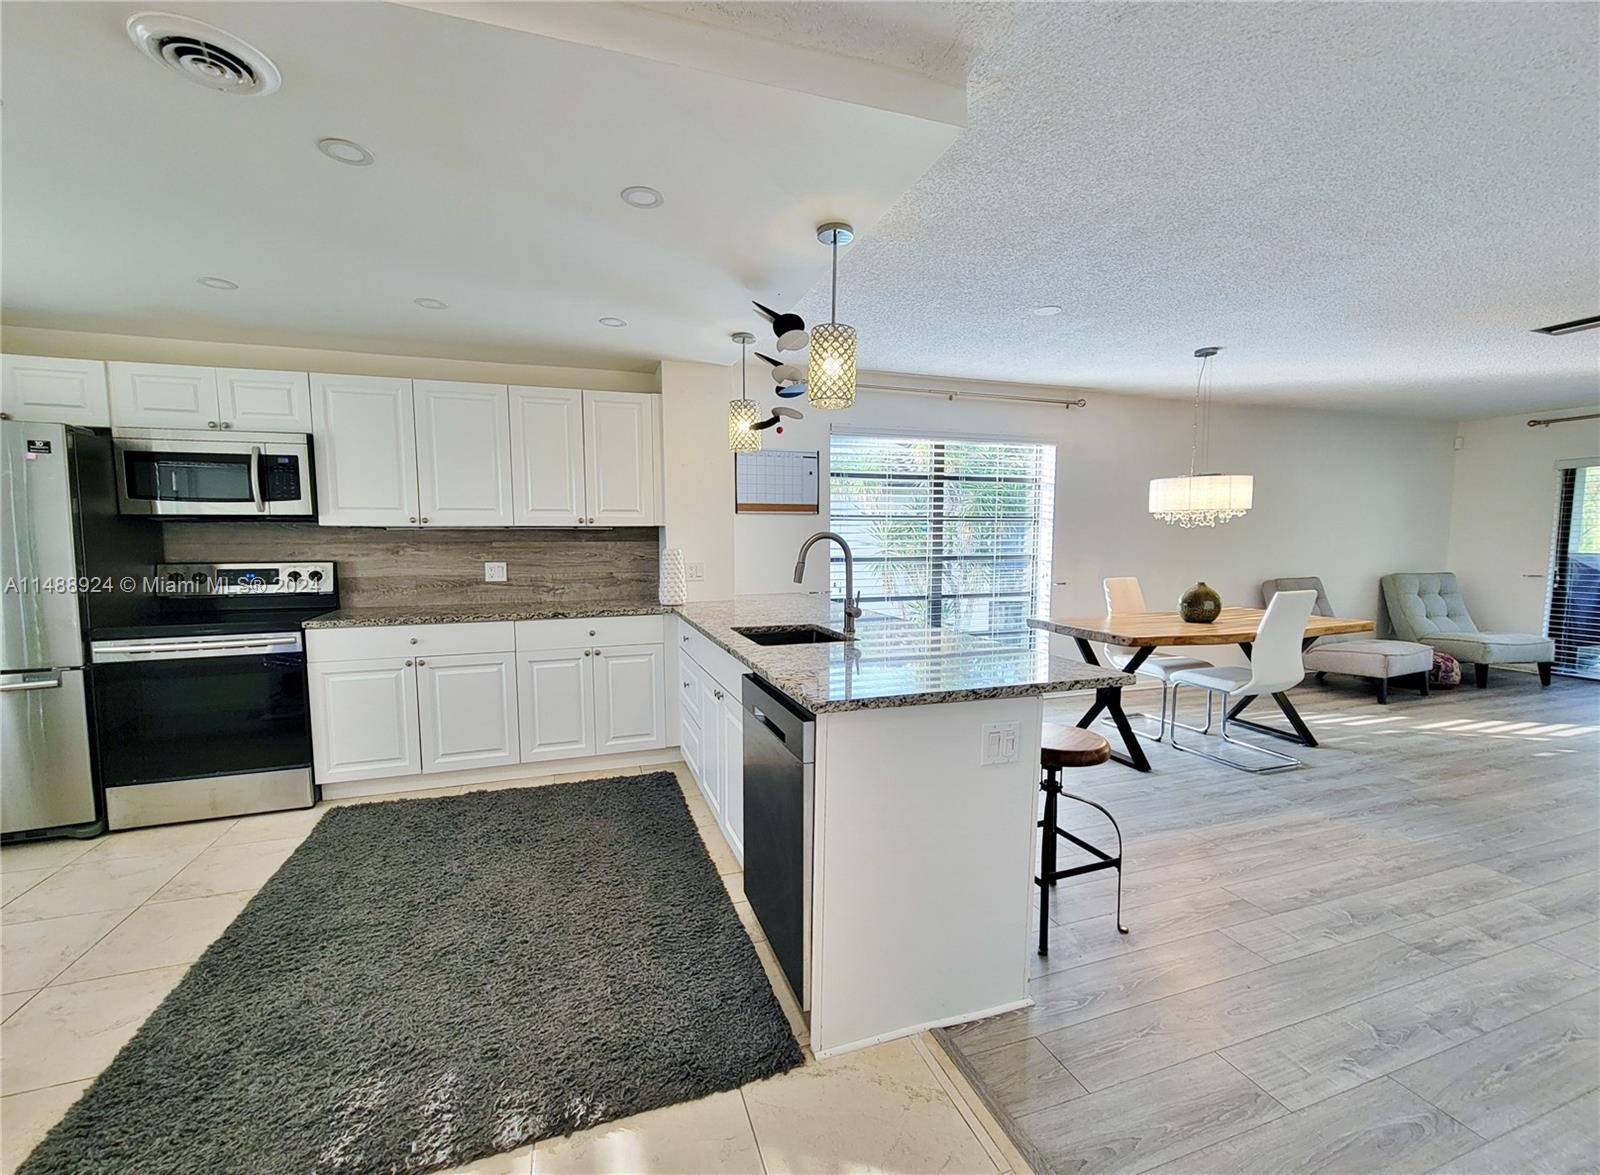 Welcome to your tranquil retreat in Boca Raton's sought-after 55+ community. This charming 2-bed, 2-